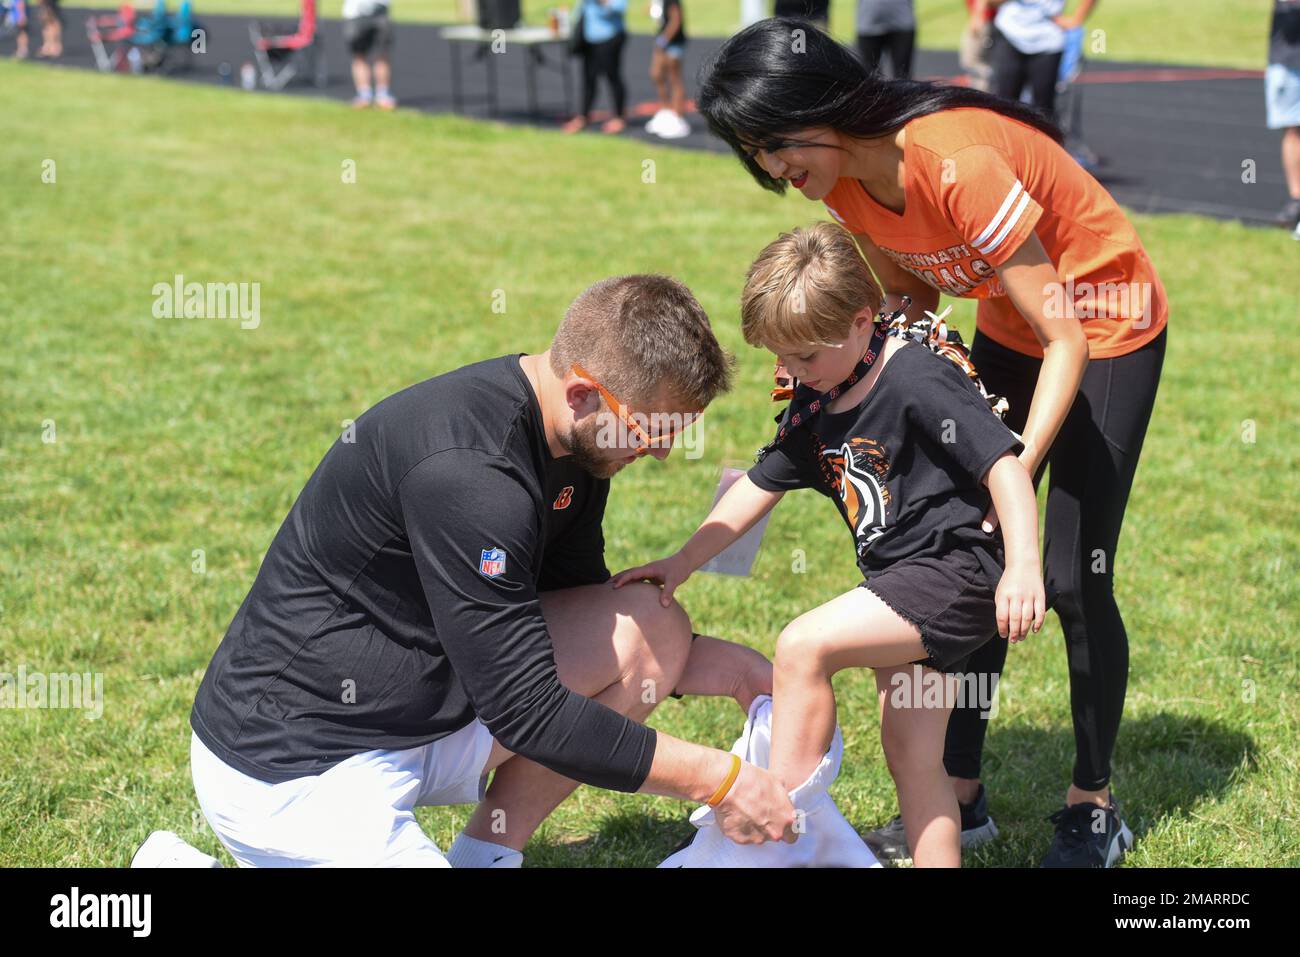 https://c8.alamy.com/comp/2MARRDC/cincinnati-bengals-tight-end-justin-riggs-helps-a-wright-patterson-air-force-base-ohio-military-child-put-on-football-pants-at-the-uso-sponsored-cincinnati-bengals-football-skills-clinic-june-3-2022-a-group-of-bengal-rookies-had-lunch-with-airmen-toured-the-base-and-led-the-skills-clinic-for-99-wright-patt-military-children-2MARRDC.jpg